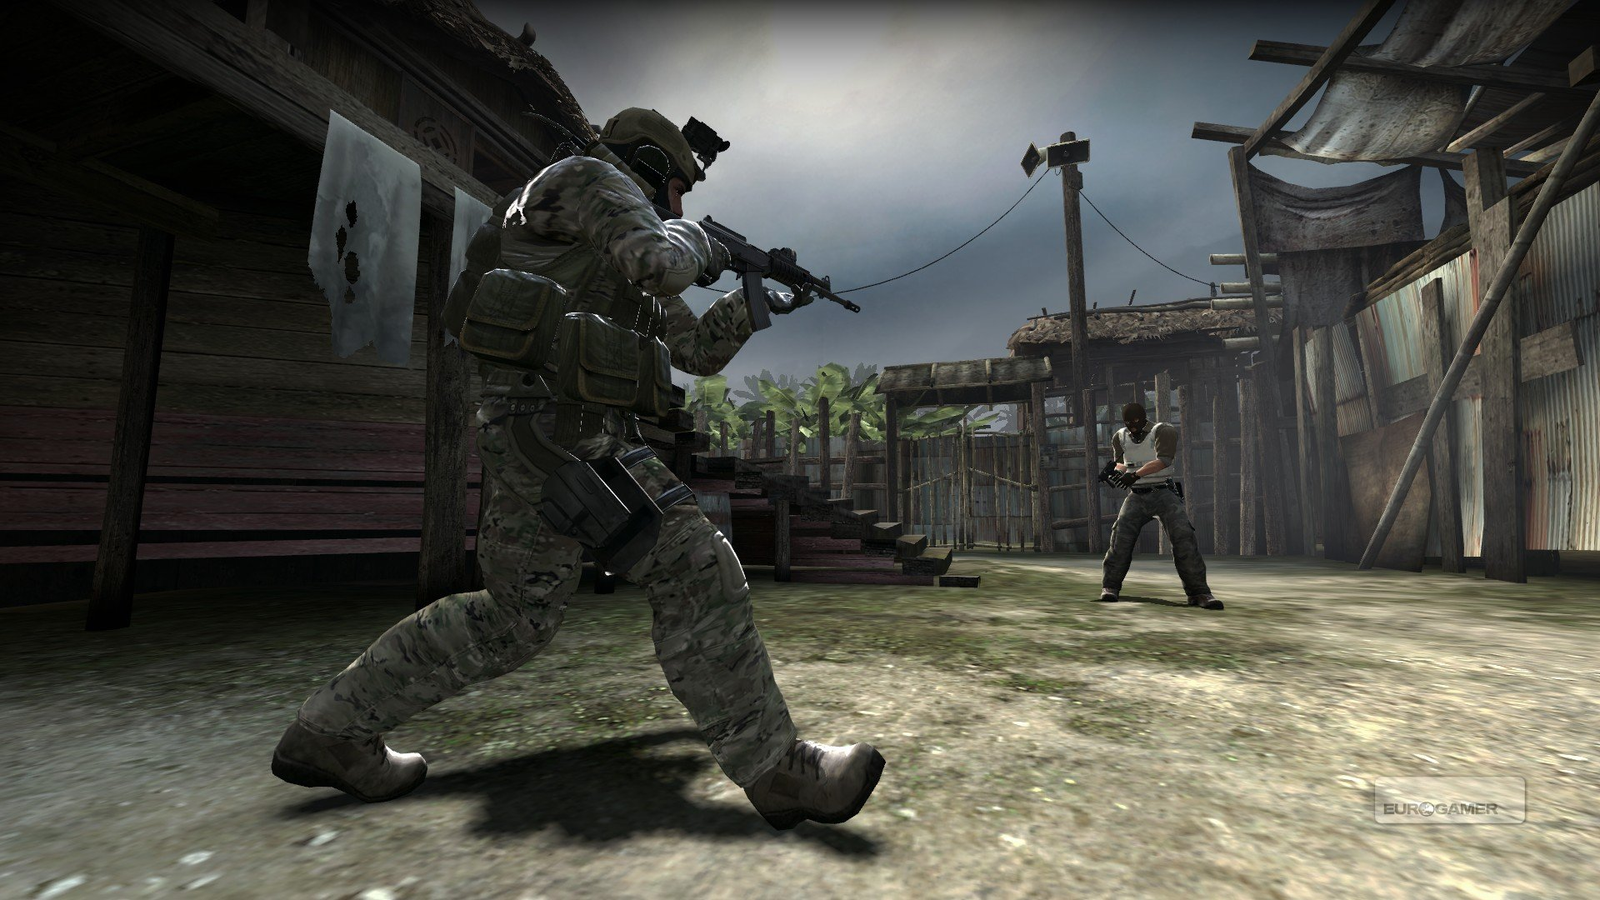 Counter-Strike 2 seems more likely than ever following Valve's recent  trademark application